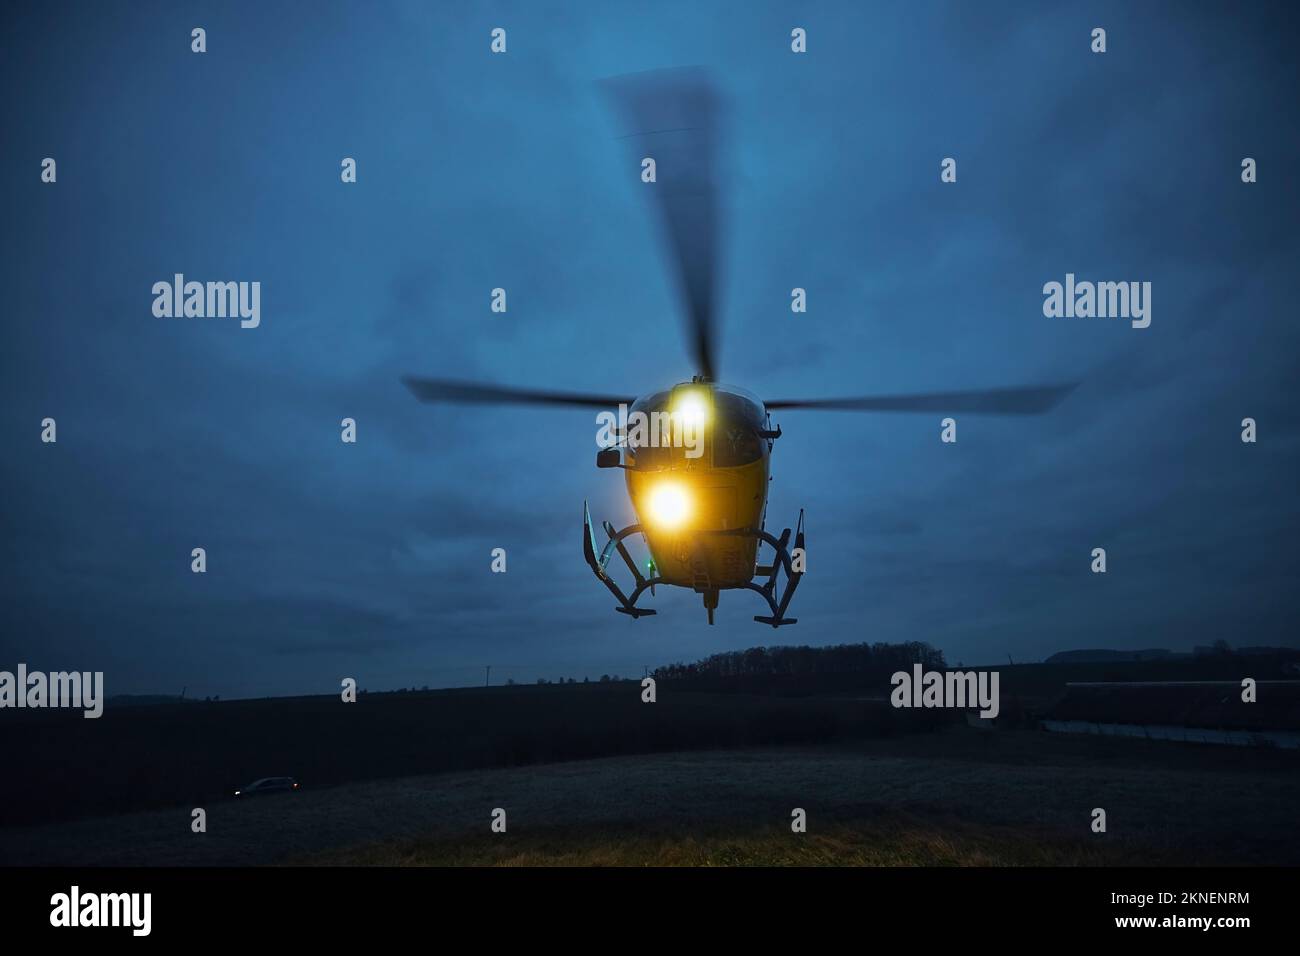 Flying helicopter of emergency medical service during take off from meadow at dusk. Themes rescue, help and hope. Stock Photo